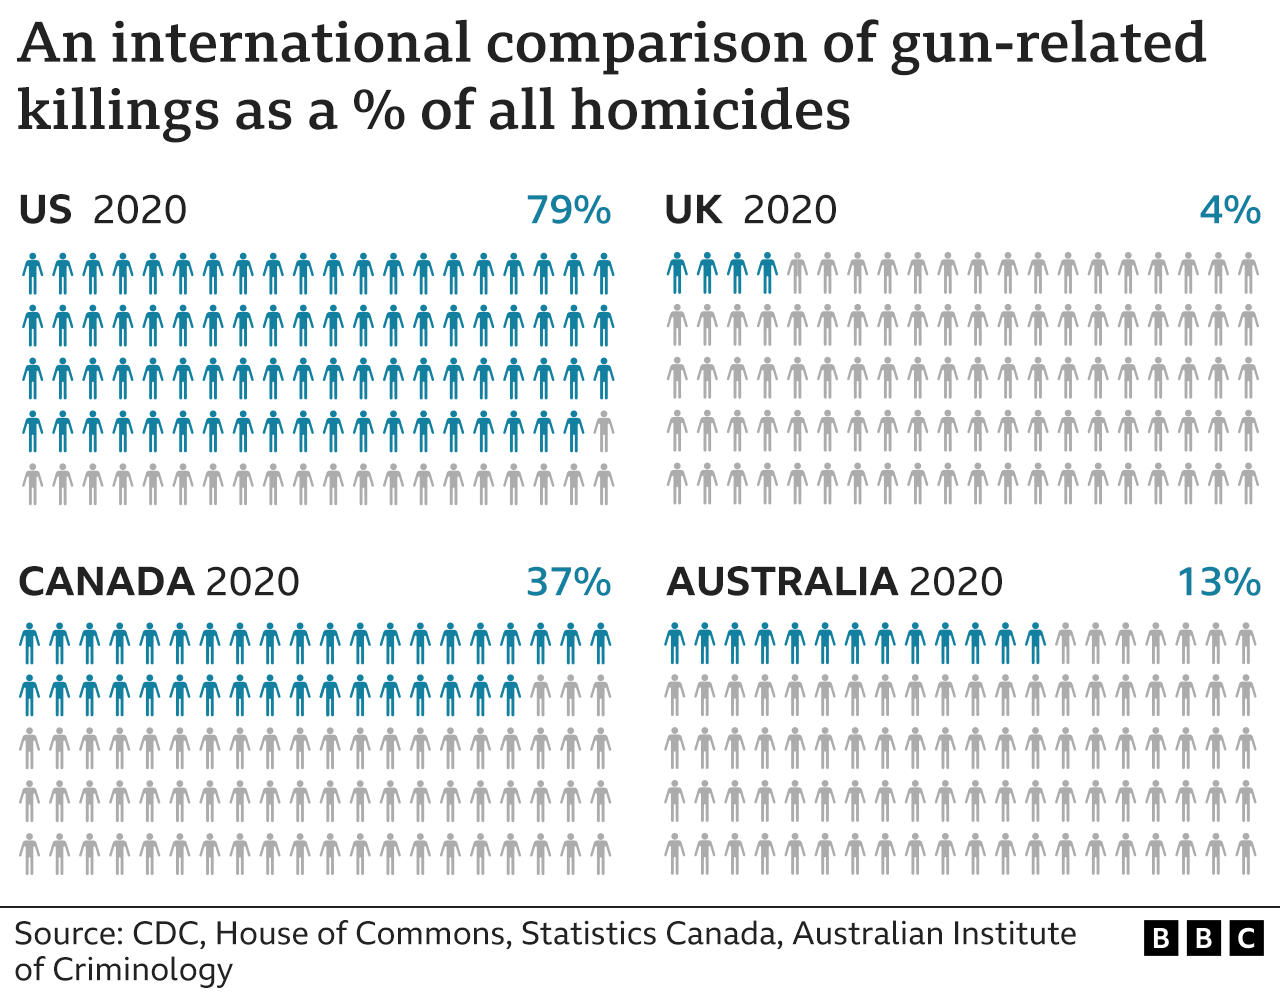 Graphic show international comparison of gun-related killings as a percentage of all homicides for each country. Di US dey lead wit nearly 79% of all homicides occurring wit guns.